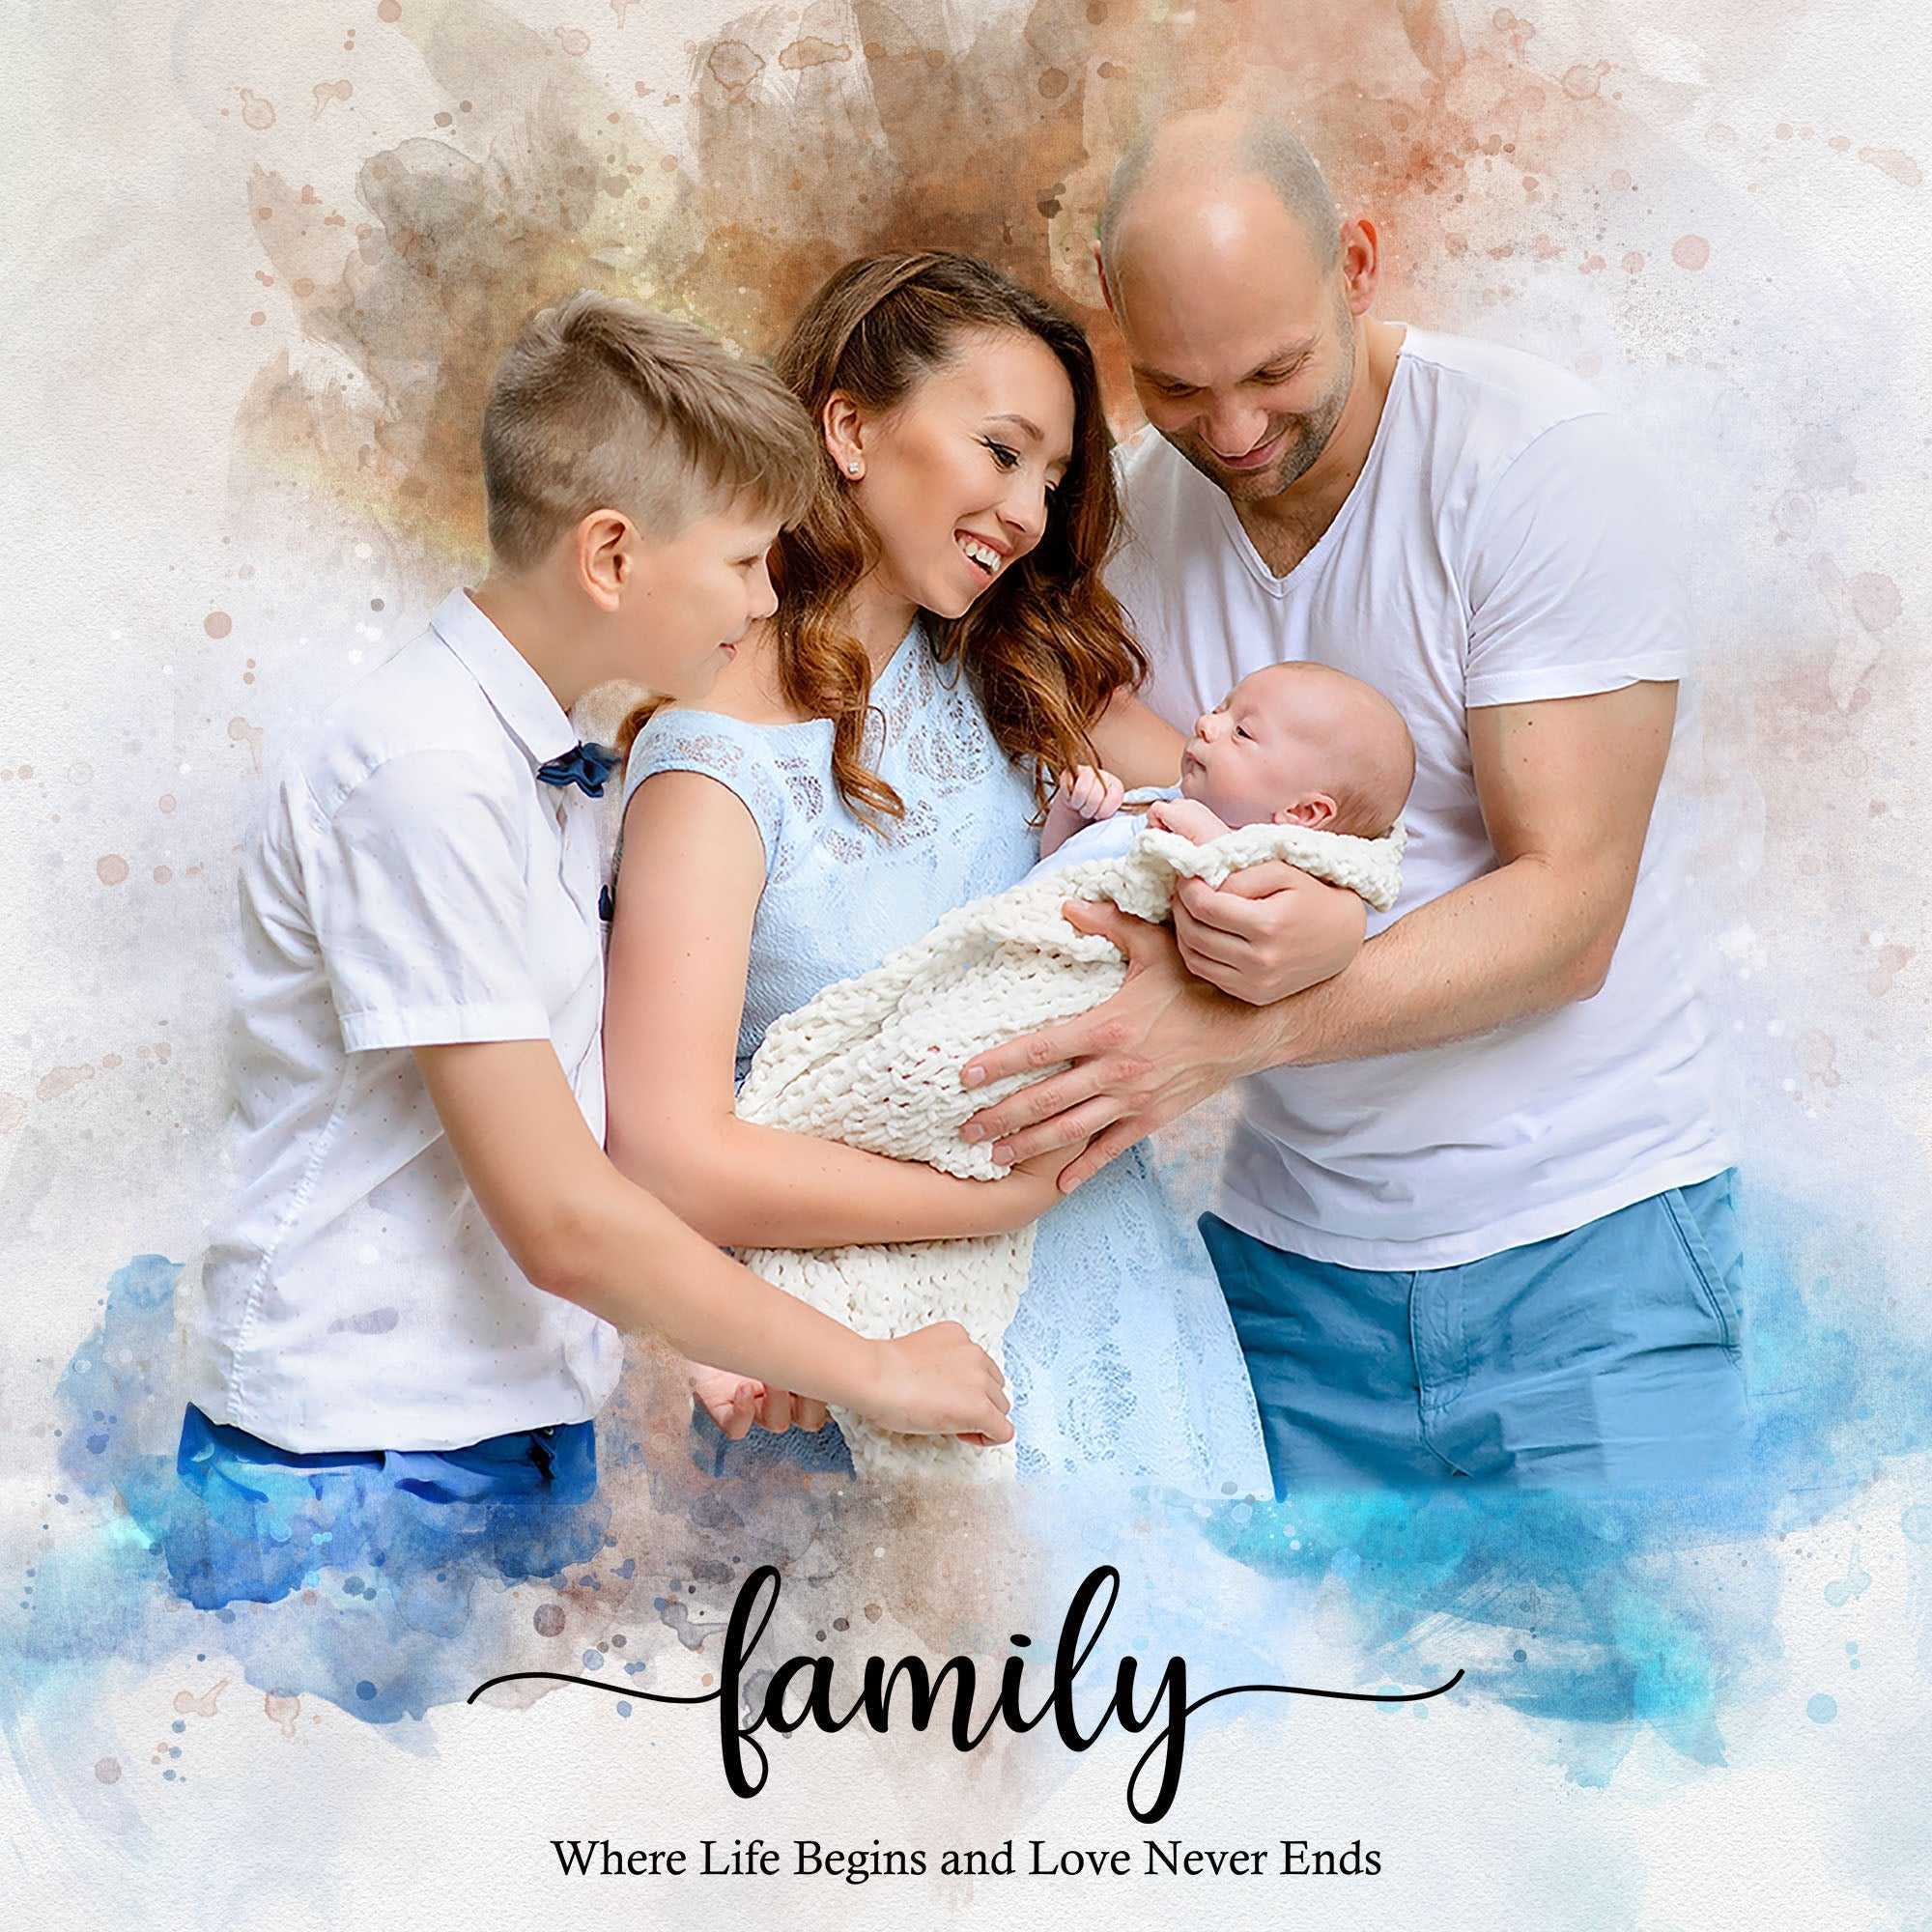 🌈 Pictures of Passed Loved Ones with New Baby 🍼❤️🧸 Memorial Portrait - FromPicToArt